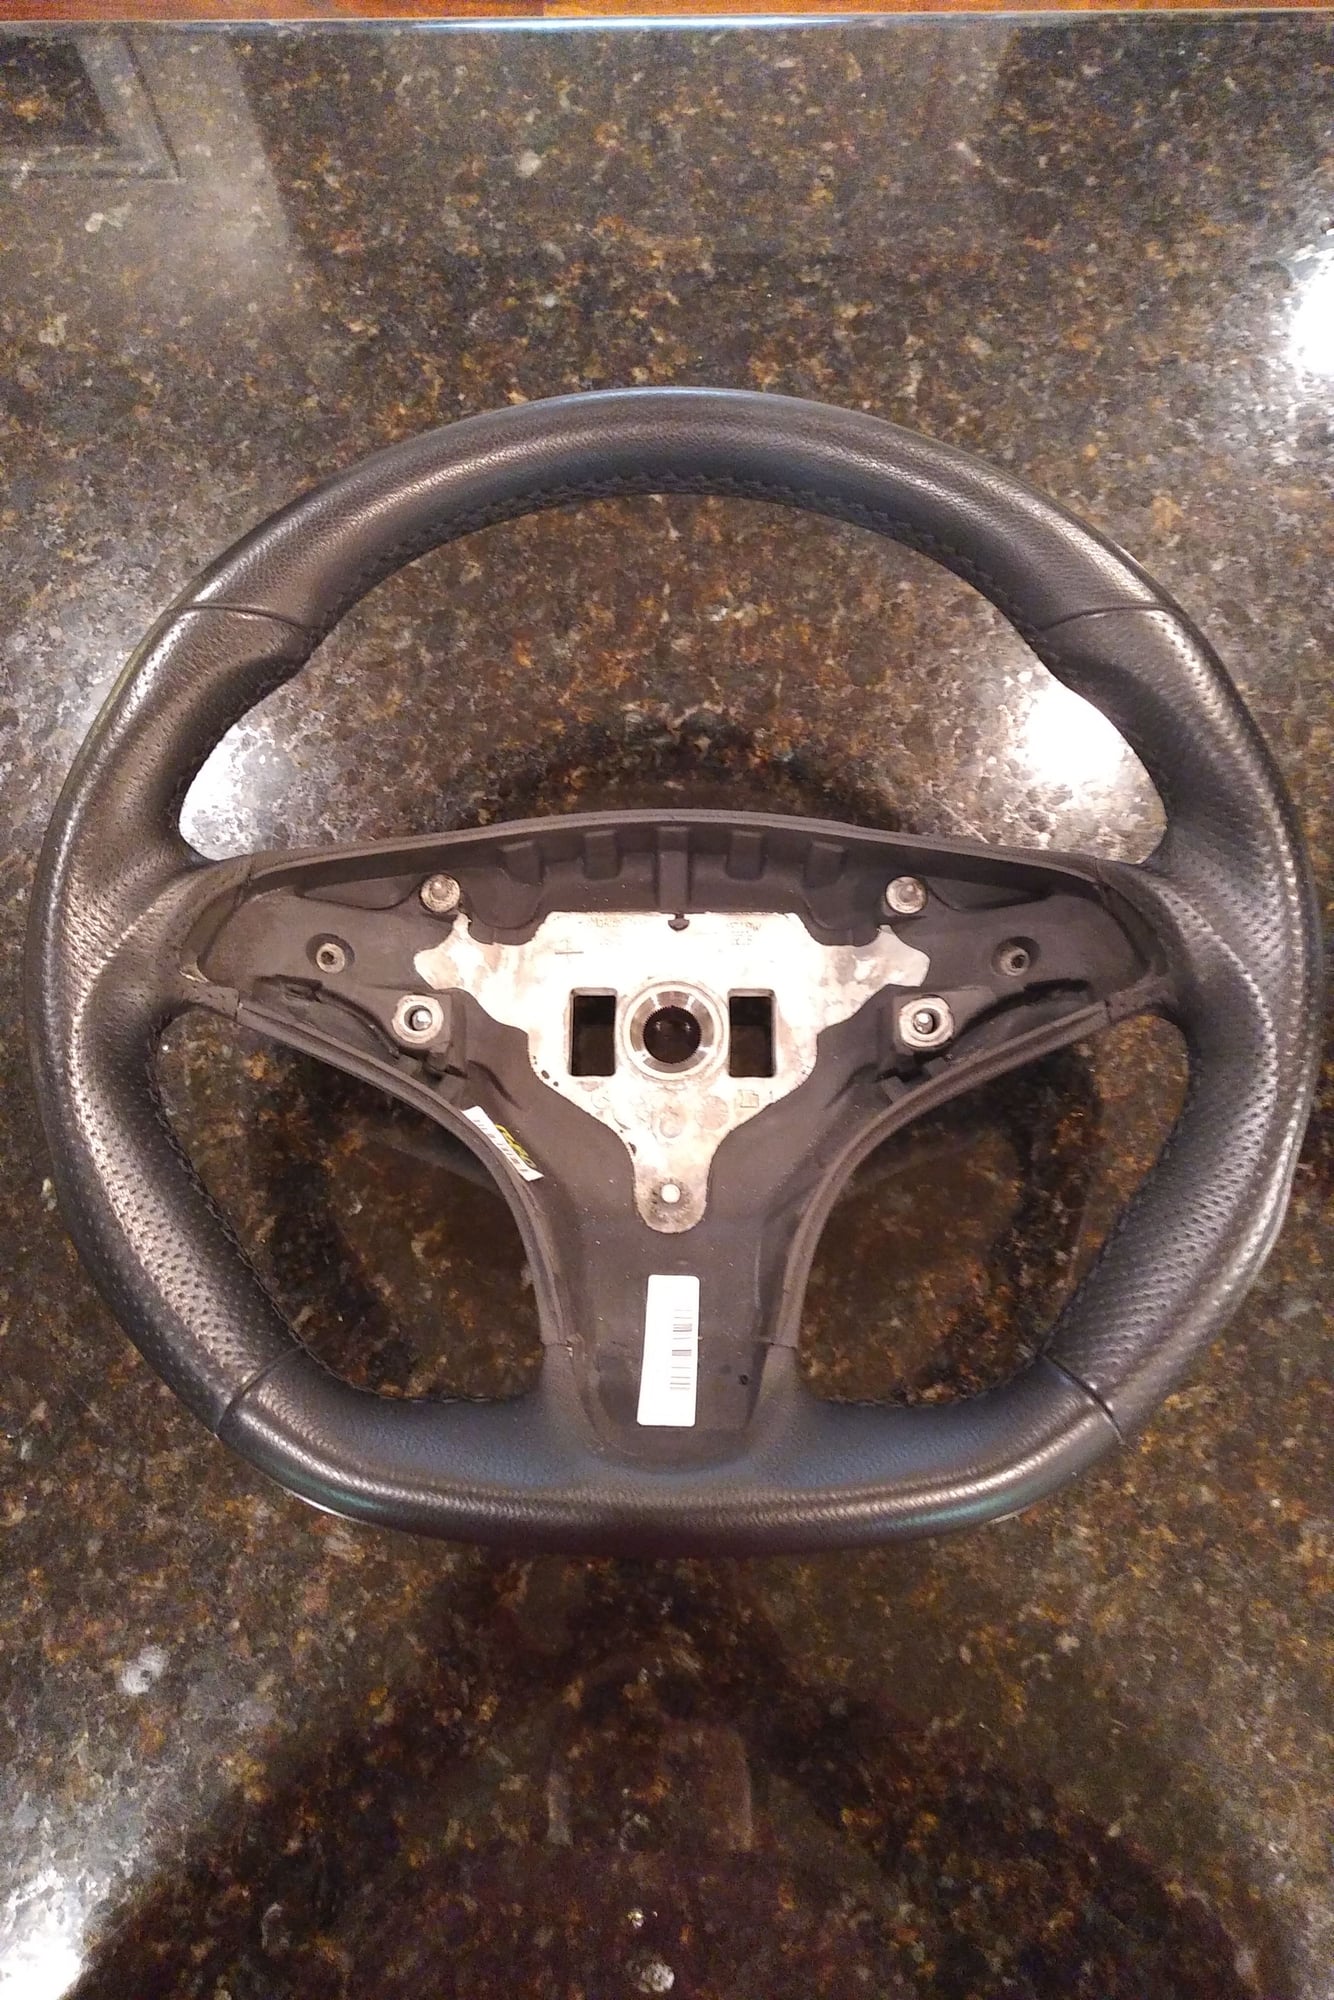 Interior/Upholstery - W204 c63 steering wheel - Used - 2007 to 2011 Mercedes-Benz C63 AMG - Dallas, TX 75024, United States